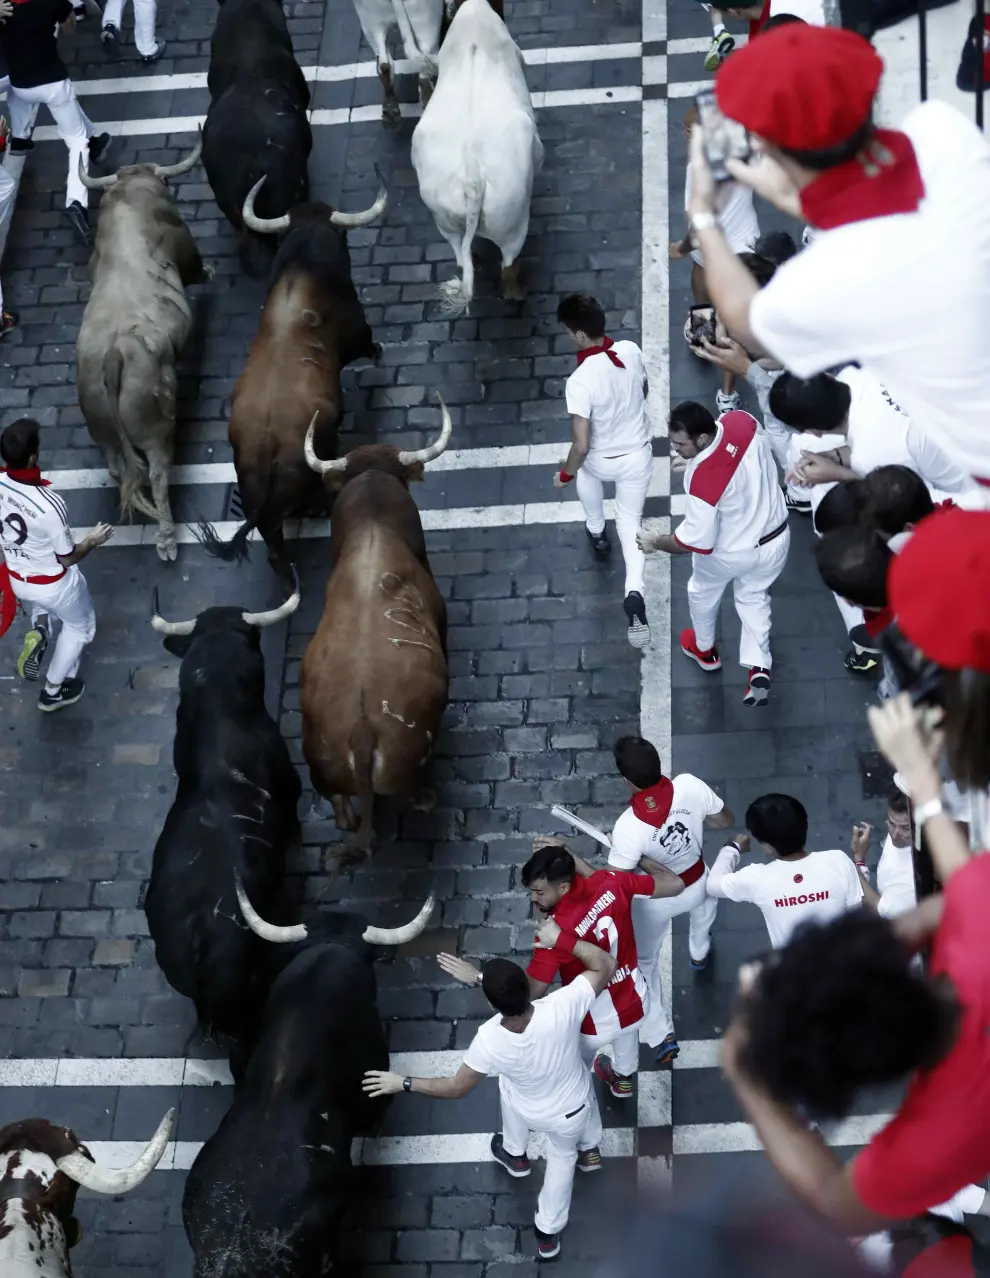 Revellers sprint near bulls and steers during the running of the bulls at the San Fermin festival in Pamplona, Spain, July 12, 2019. REUTERS/Jon Nazca [[[REUTERS VOCENTO]]] SPAIN-CULTURE/BULLS